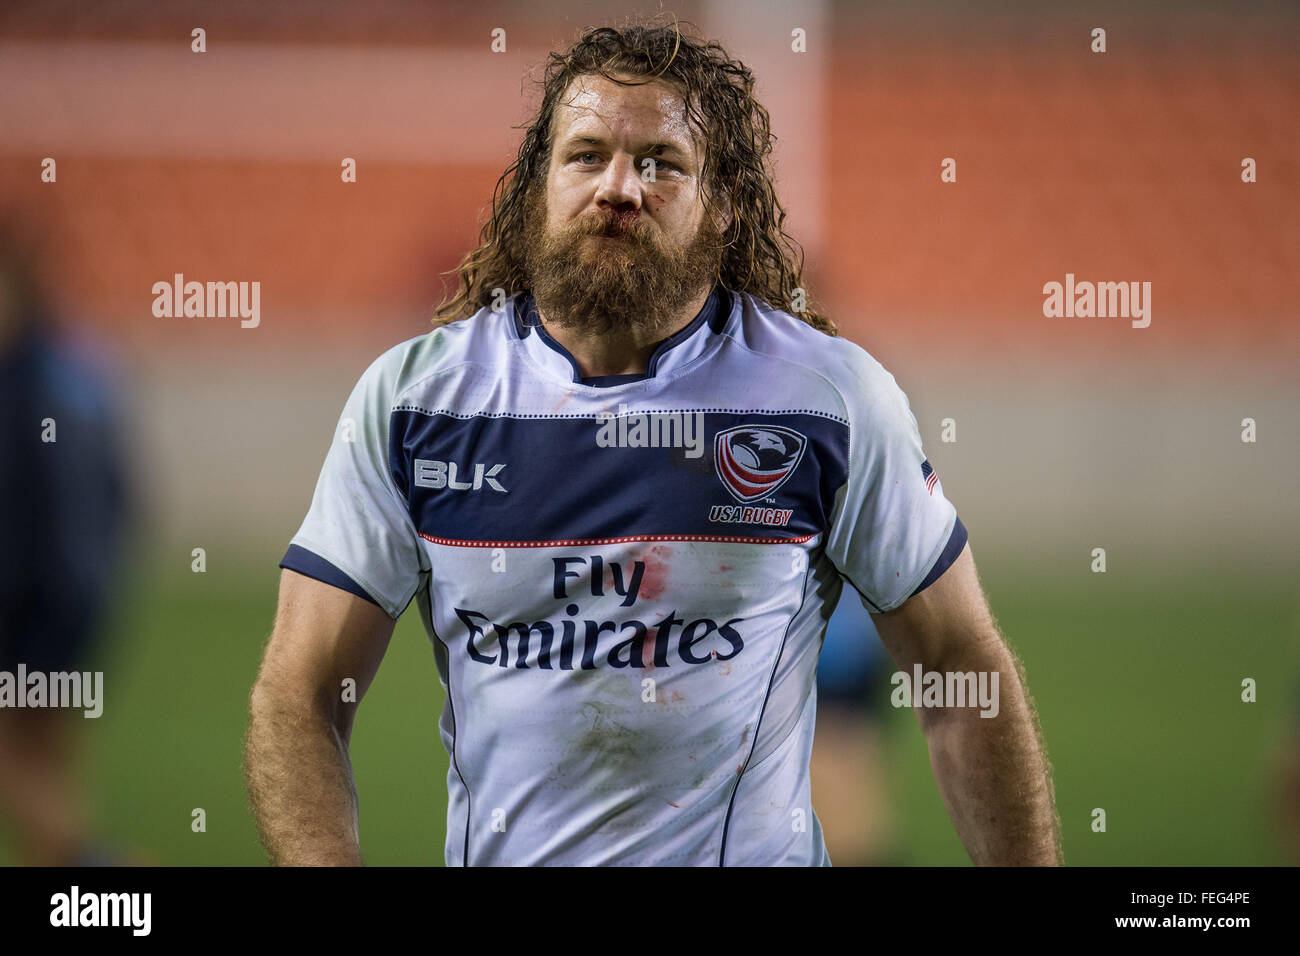 February 6, 2016: USA's Todd Clever(7) walks off the field with a bloody nose after a rugby match between Argentina and the USA in the Americas Rugby Championship at BBVA Compass Stadium in Houston, TX. The game ended in a 35-35 draw.Trask Smith/CSM Stock Photo